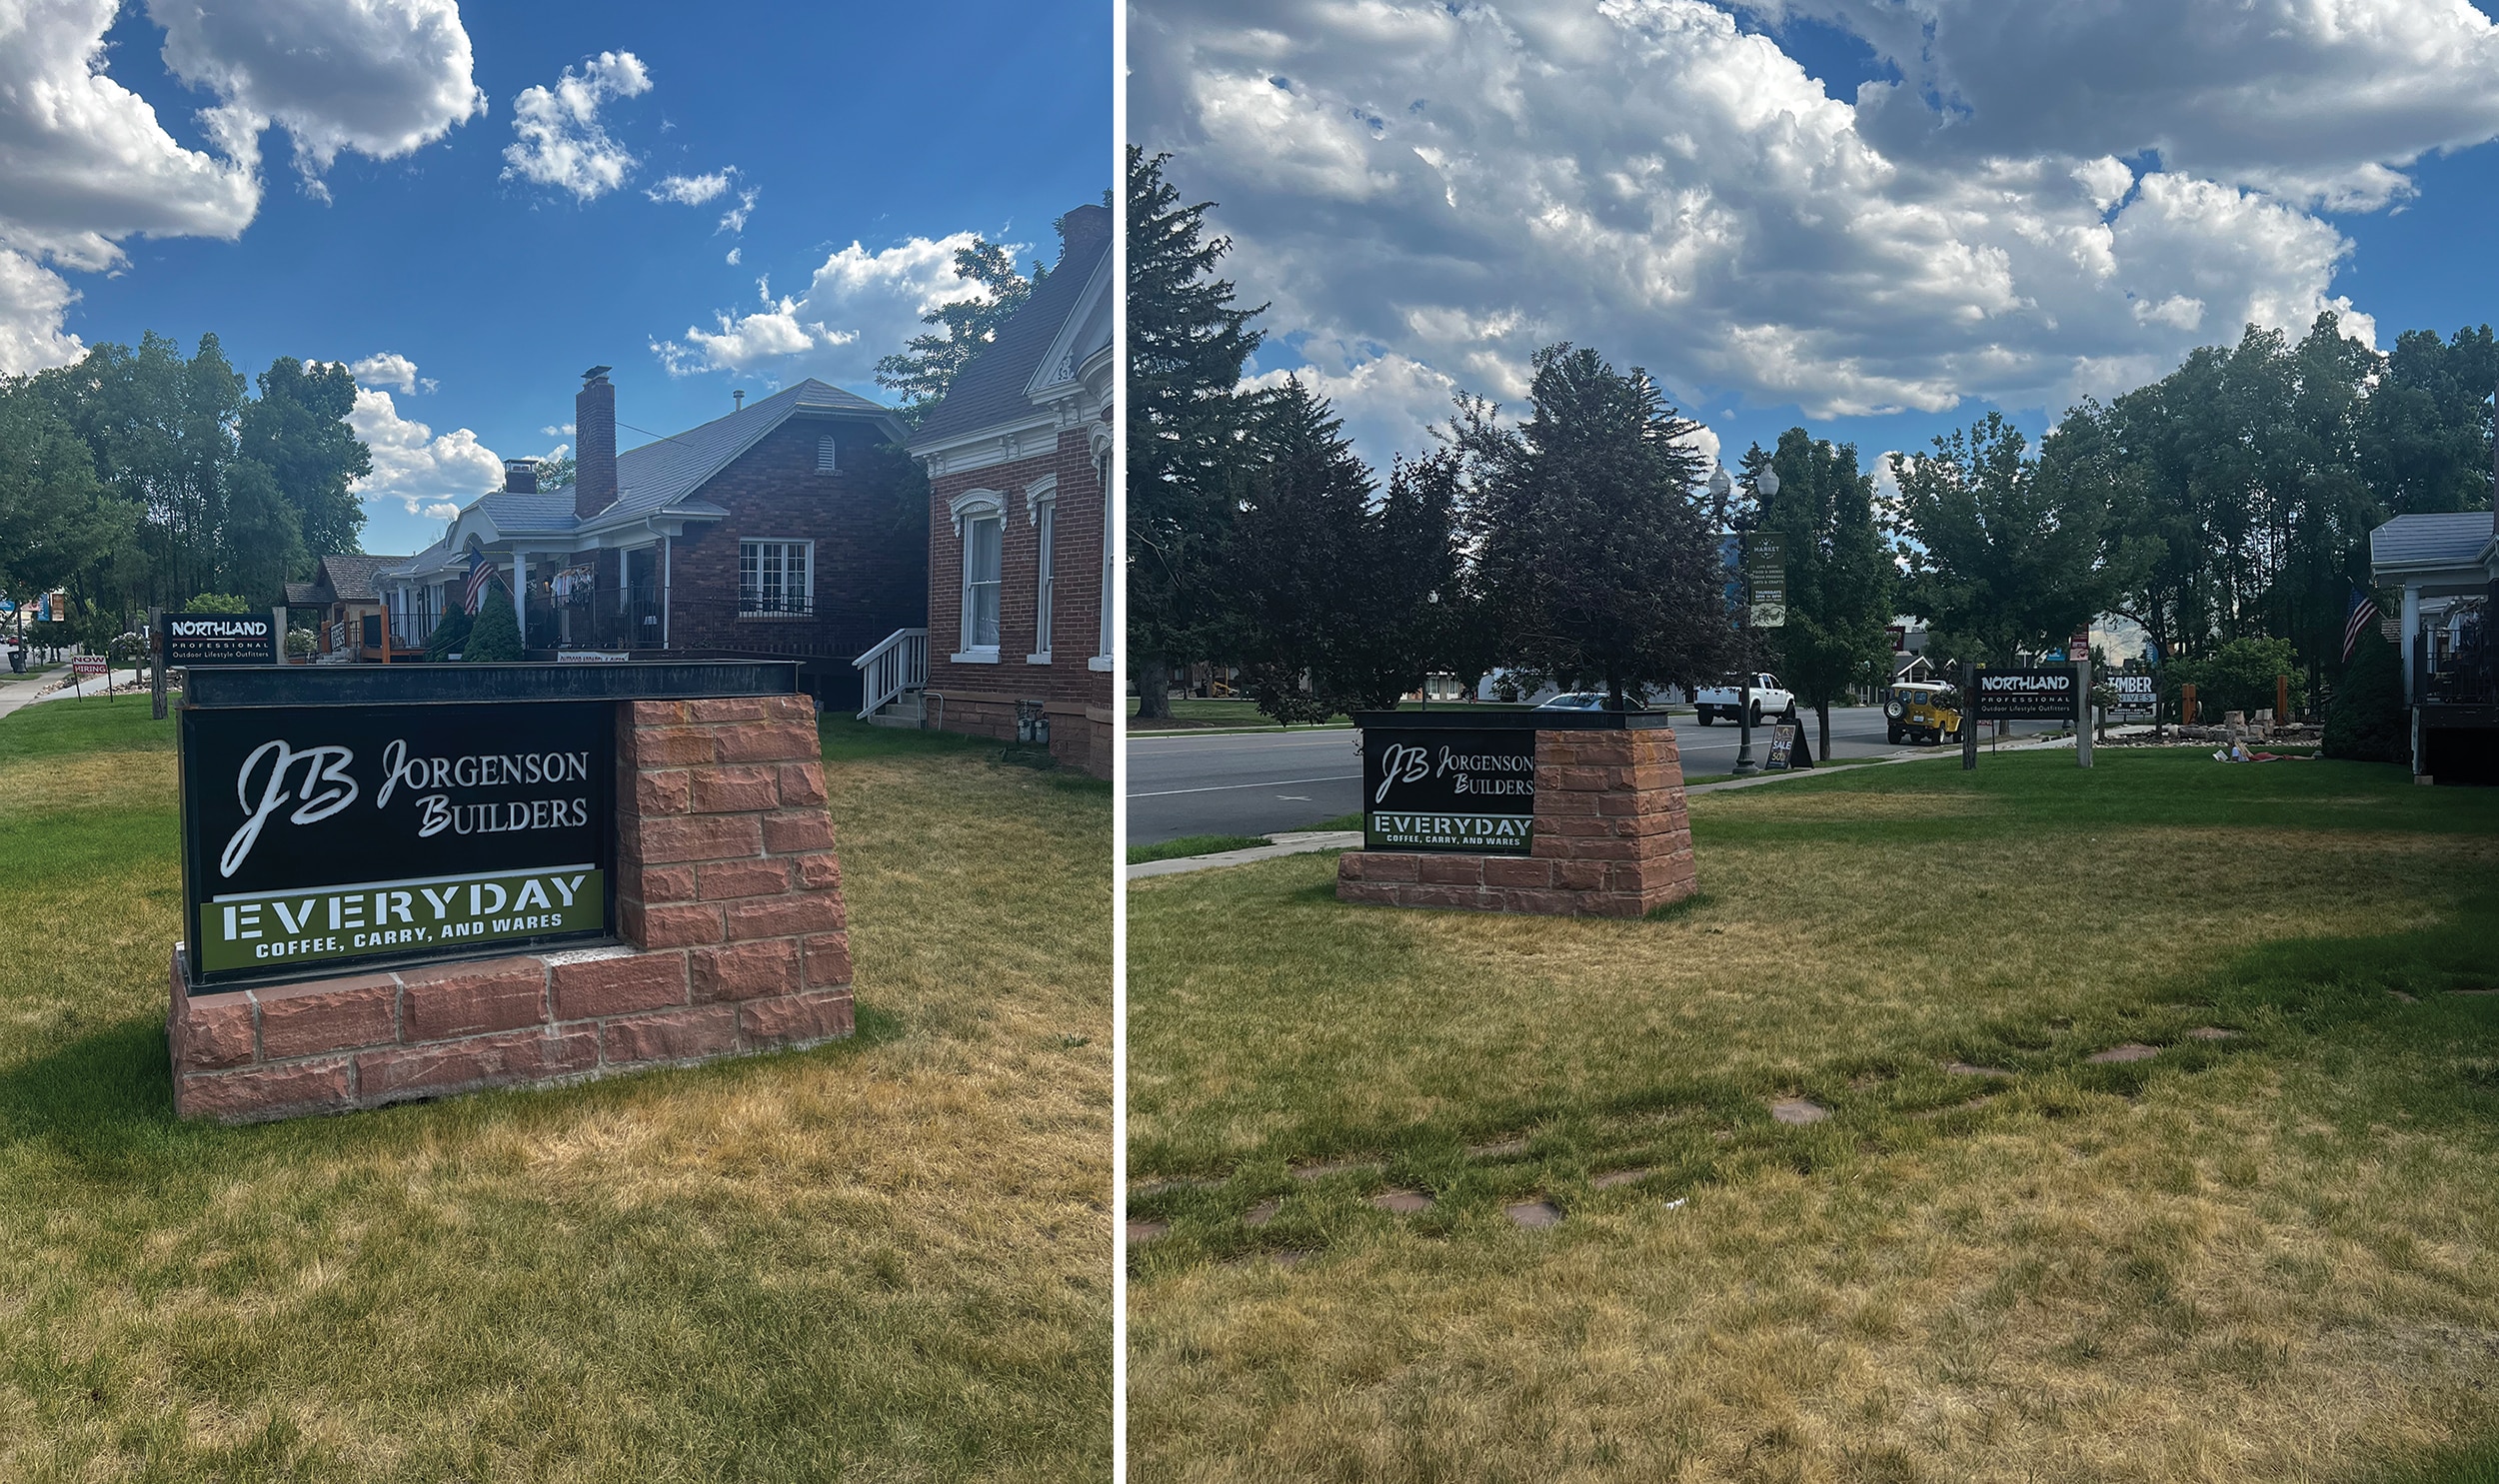 Solid as a Rock Wasatch Back Sign- arama used valued local stonework in this monument to convey quality and permanence.